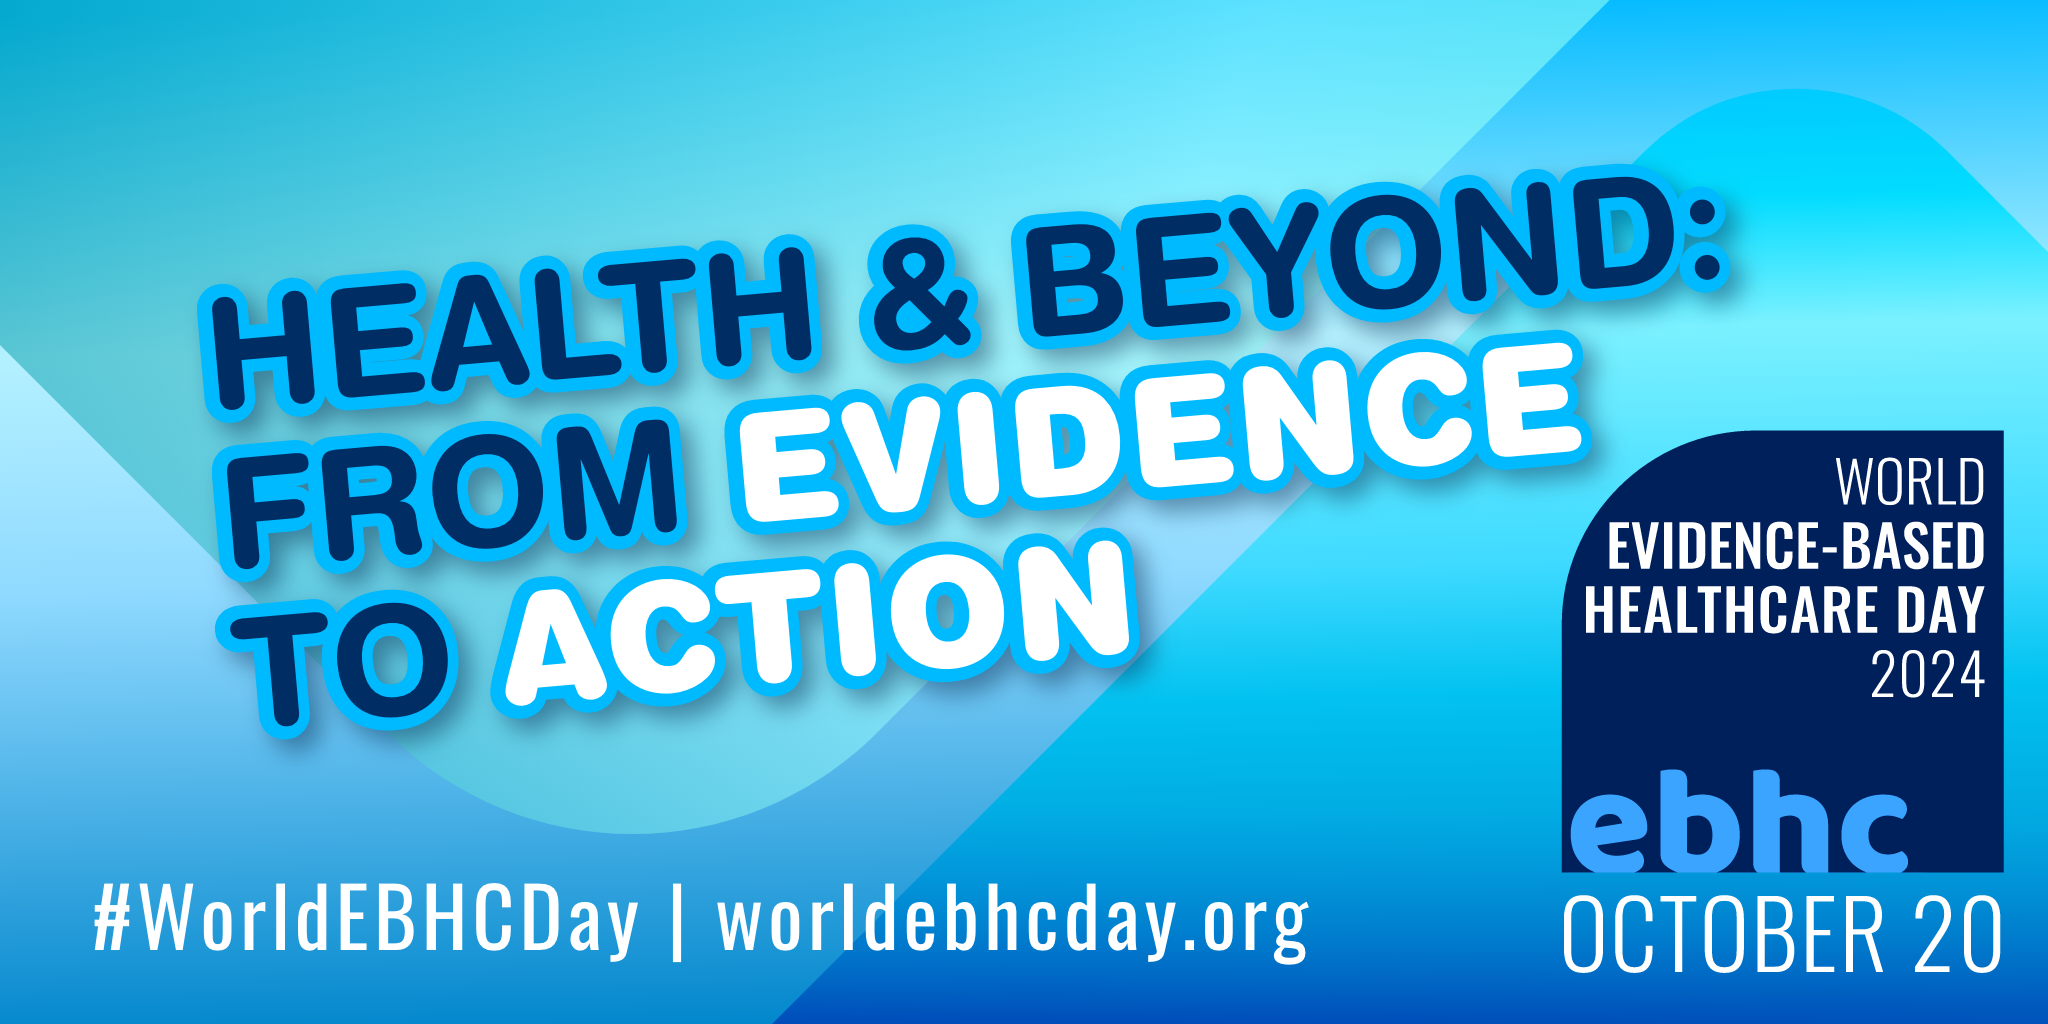 'Health and Beyond: From Evidence to Action with the World EBHC Day logo